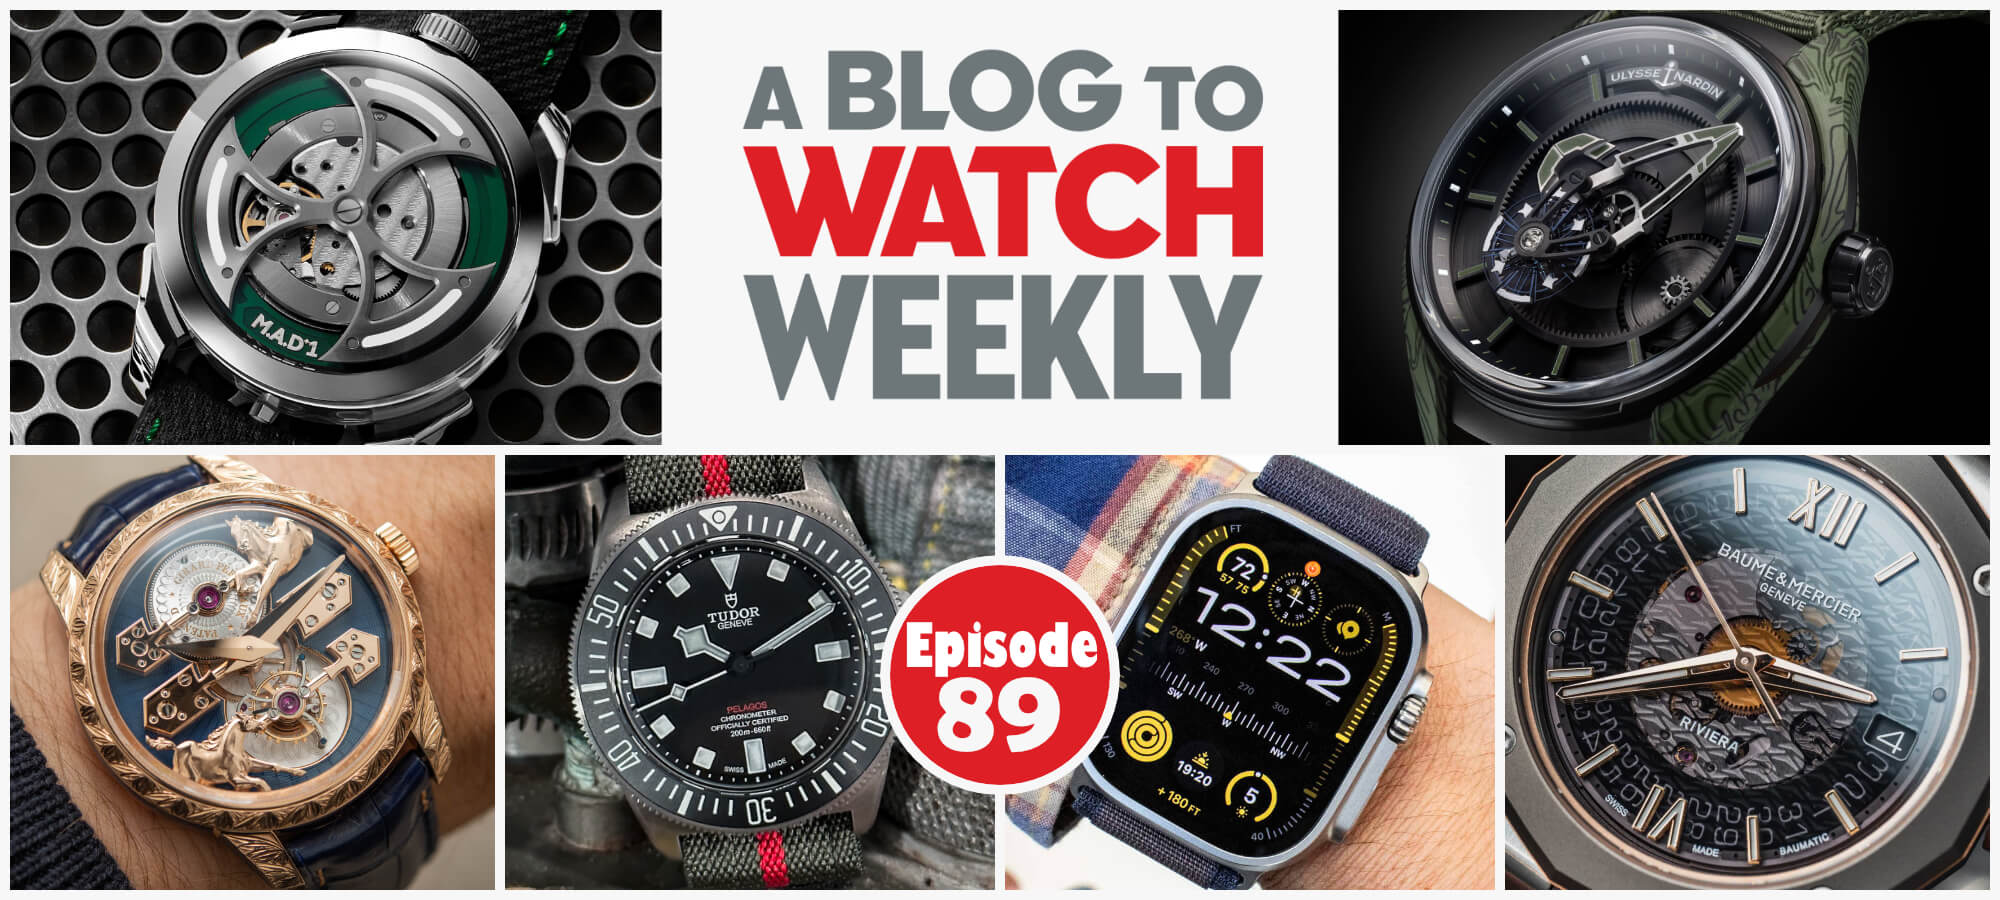 aBlogtoWatch Weekly Episode 89